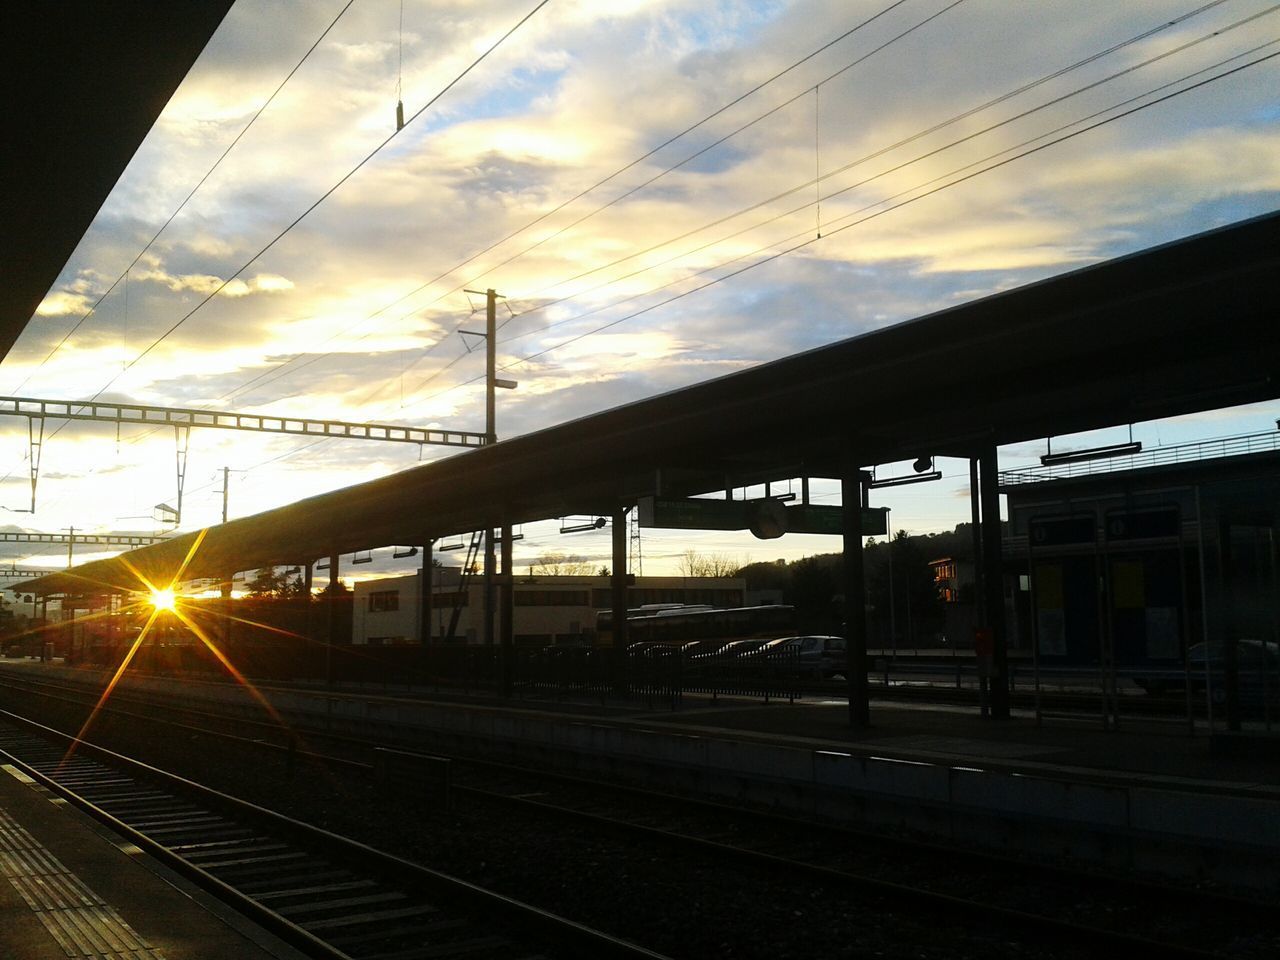 RAILROAD TRACKS AGAINST SKY DURING SUNSET